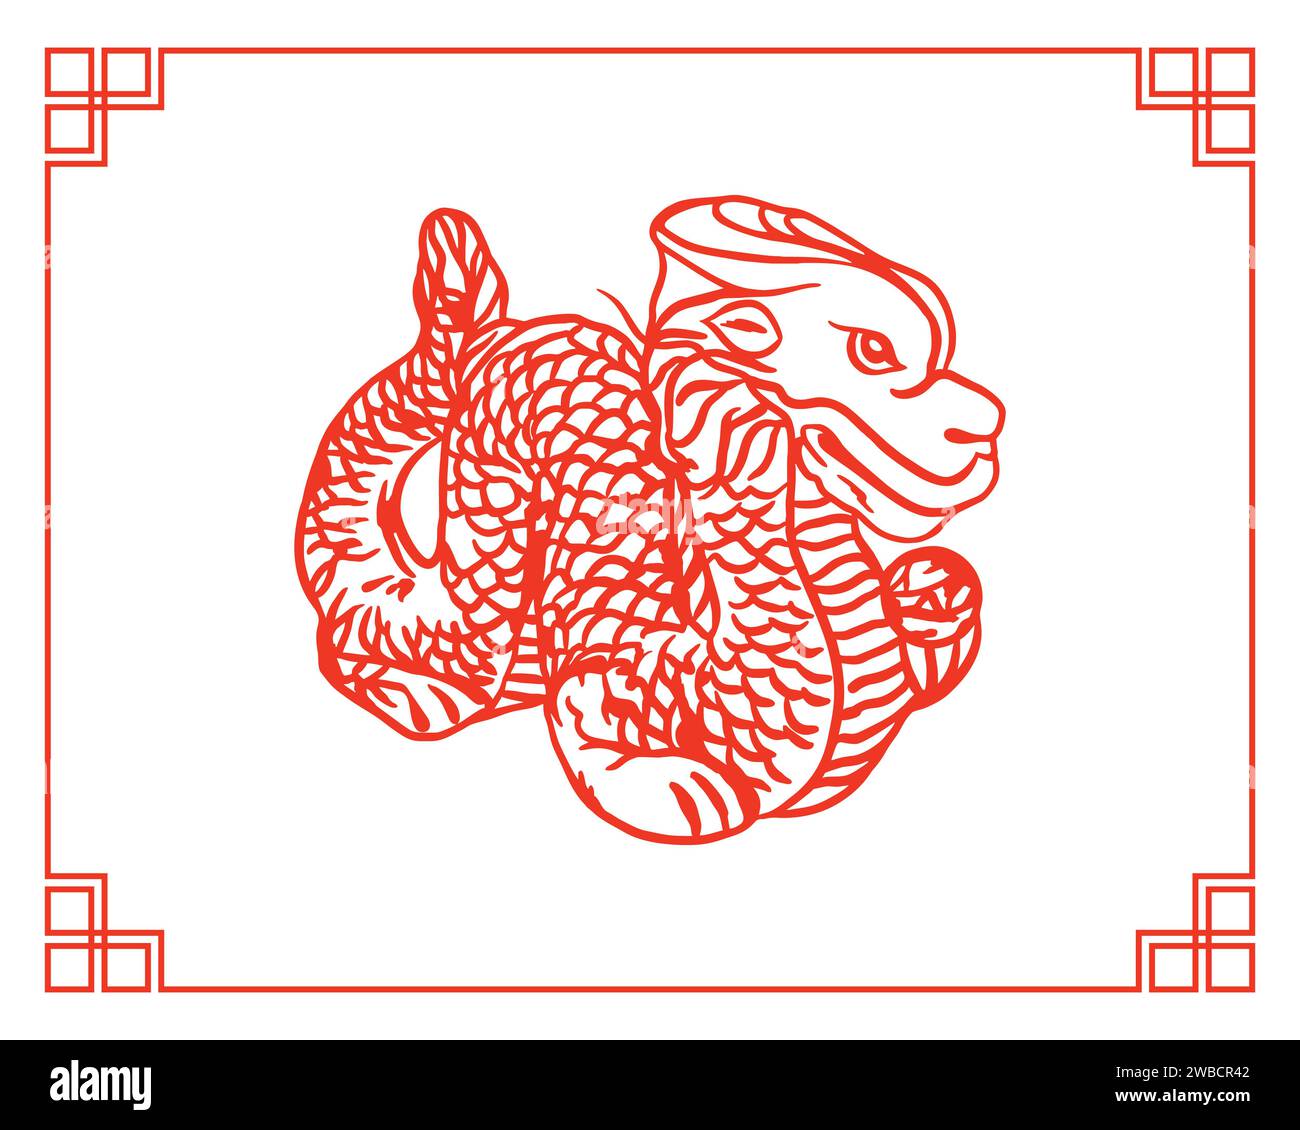 Chinese dragon, vector. Chinese New Year. Design element for traditional greeting cards, invitations, large banners, posters, gift wrapping. Stock Vector